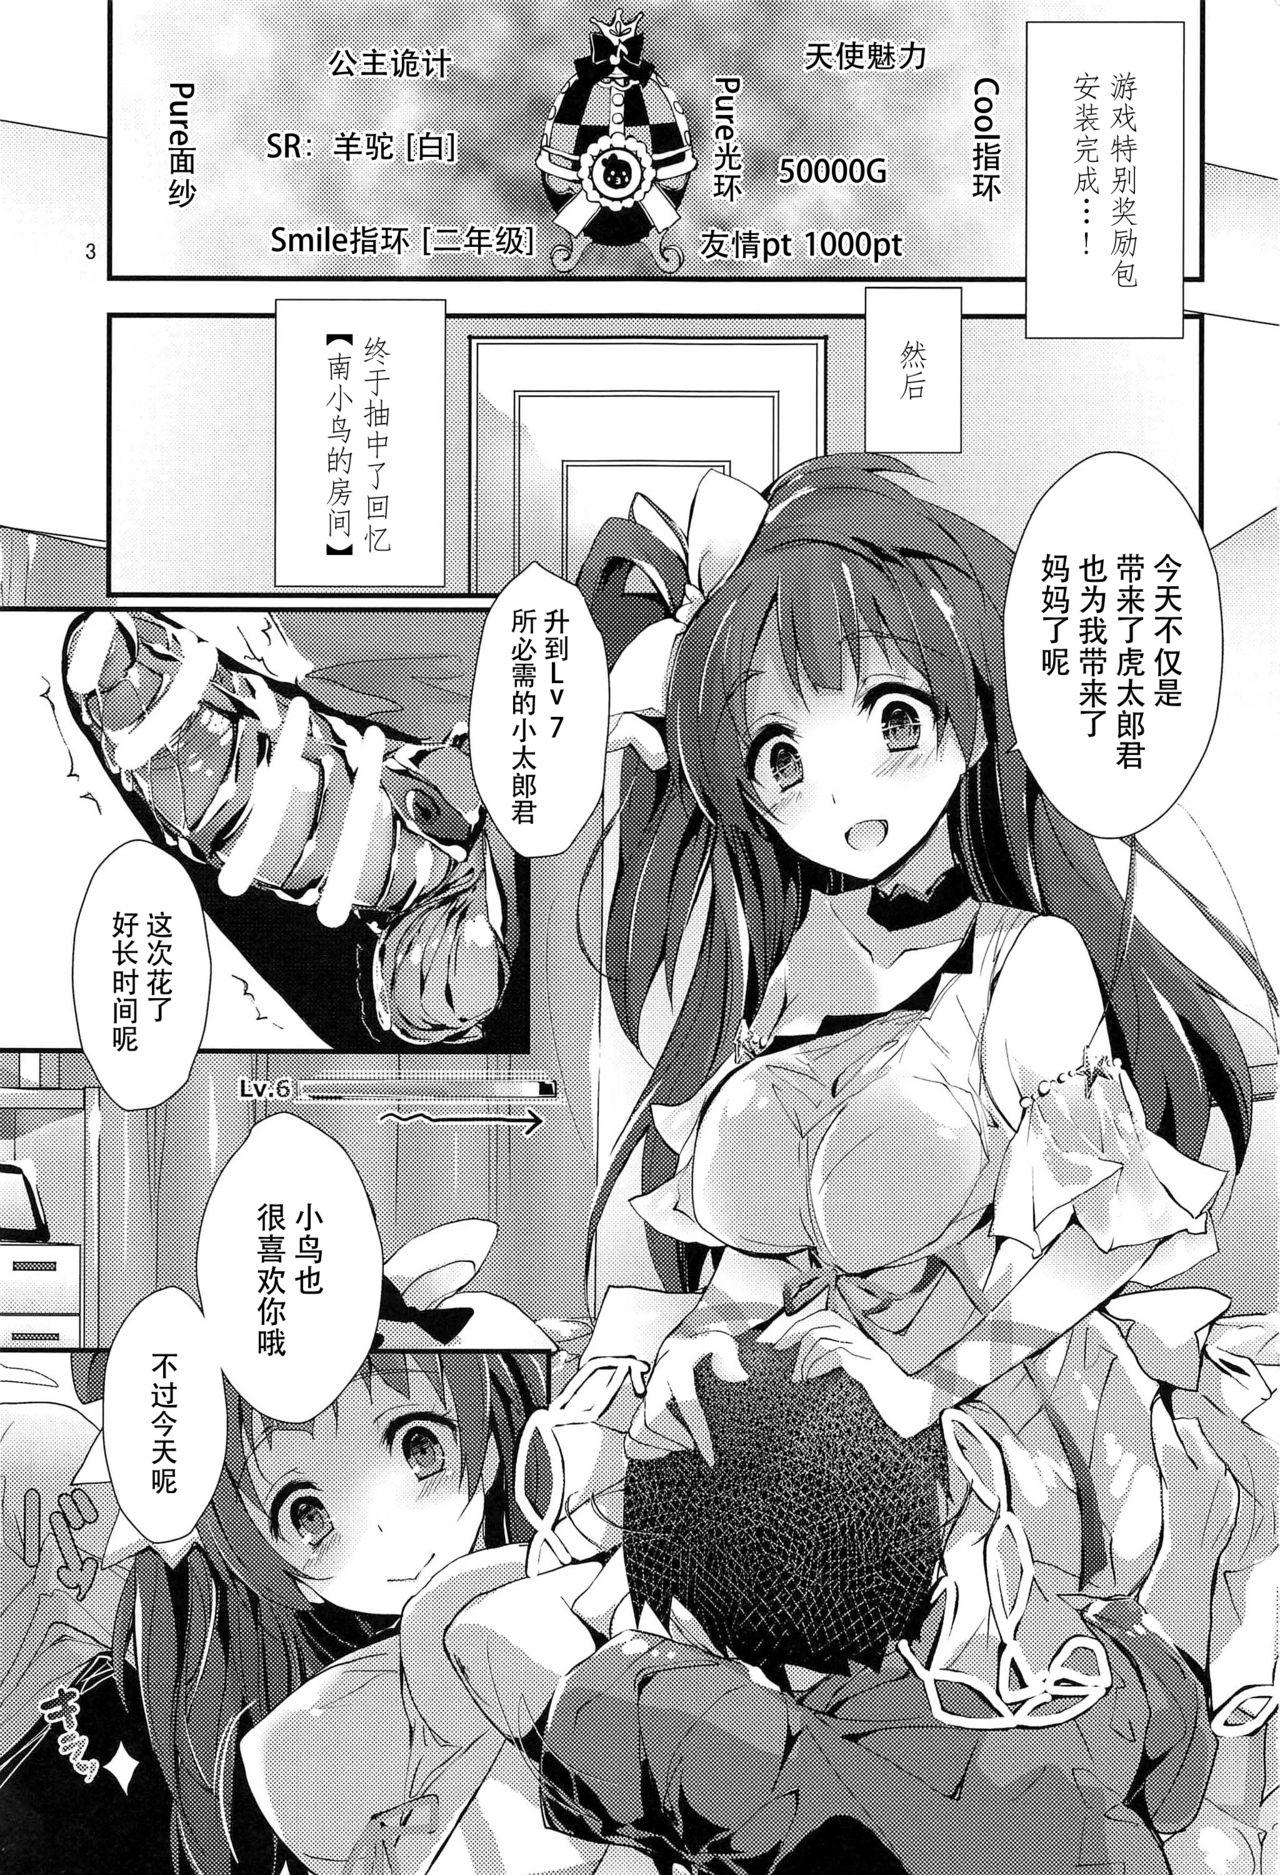 Paja ENDLESS TRADE - Love live Housewife - Page 3